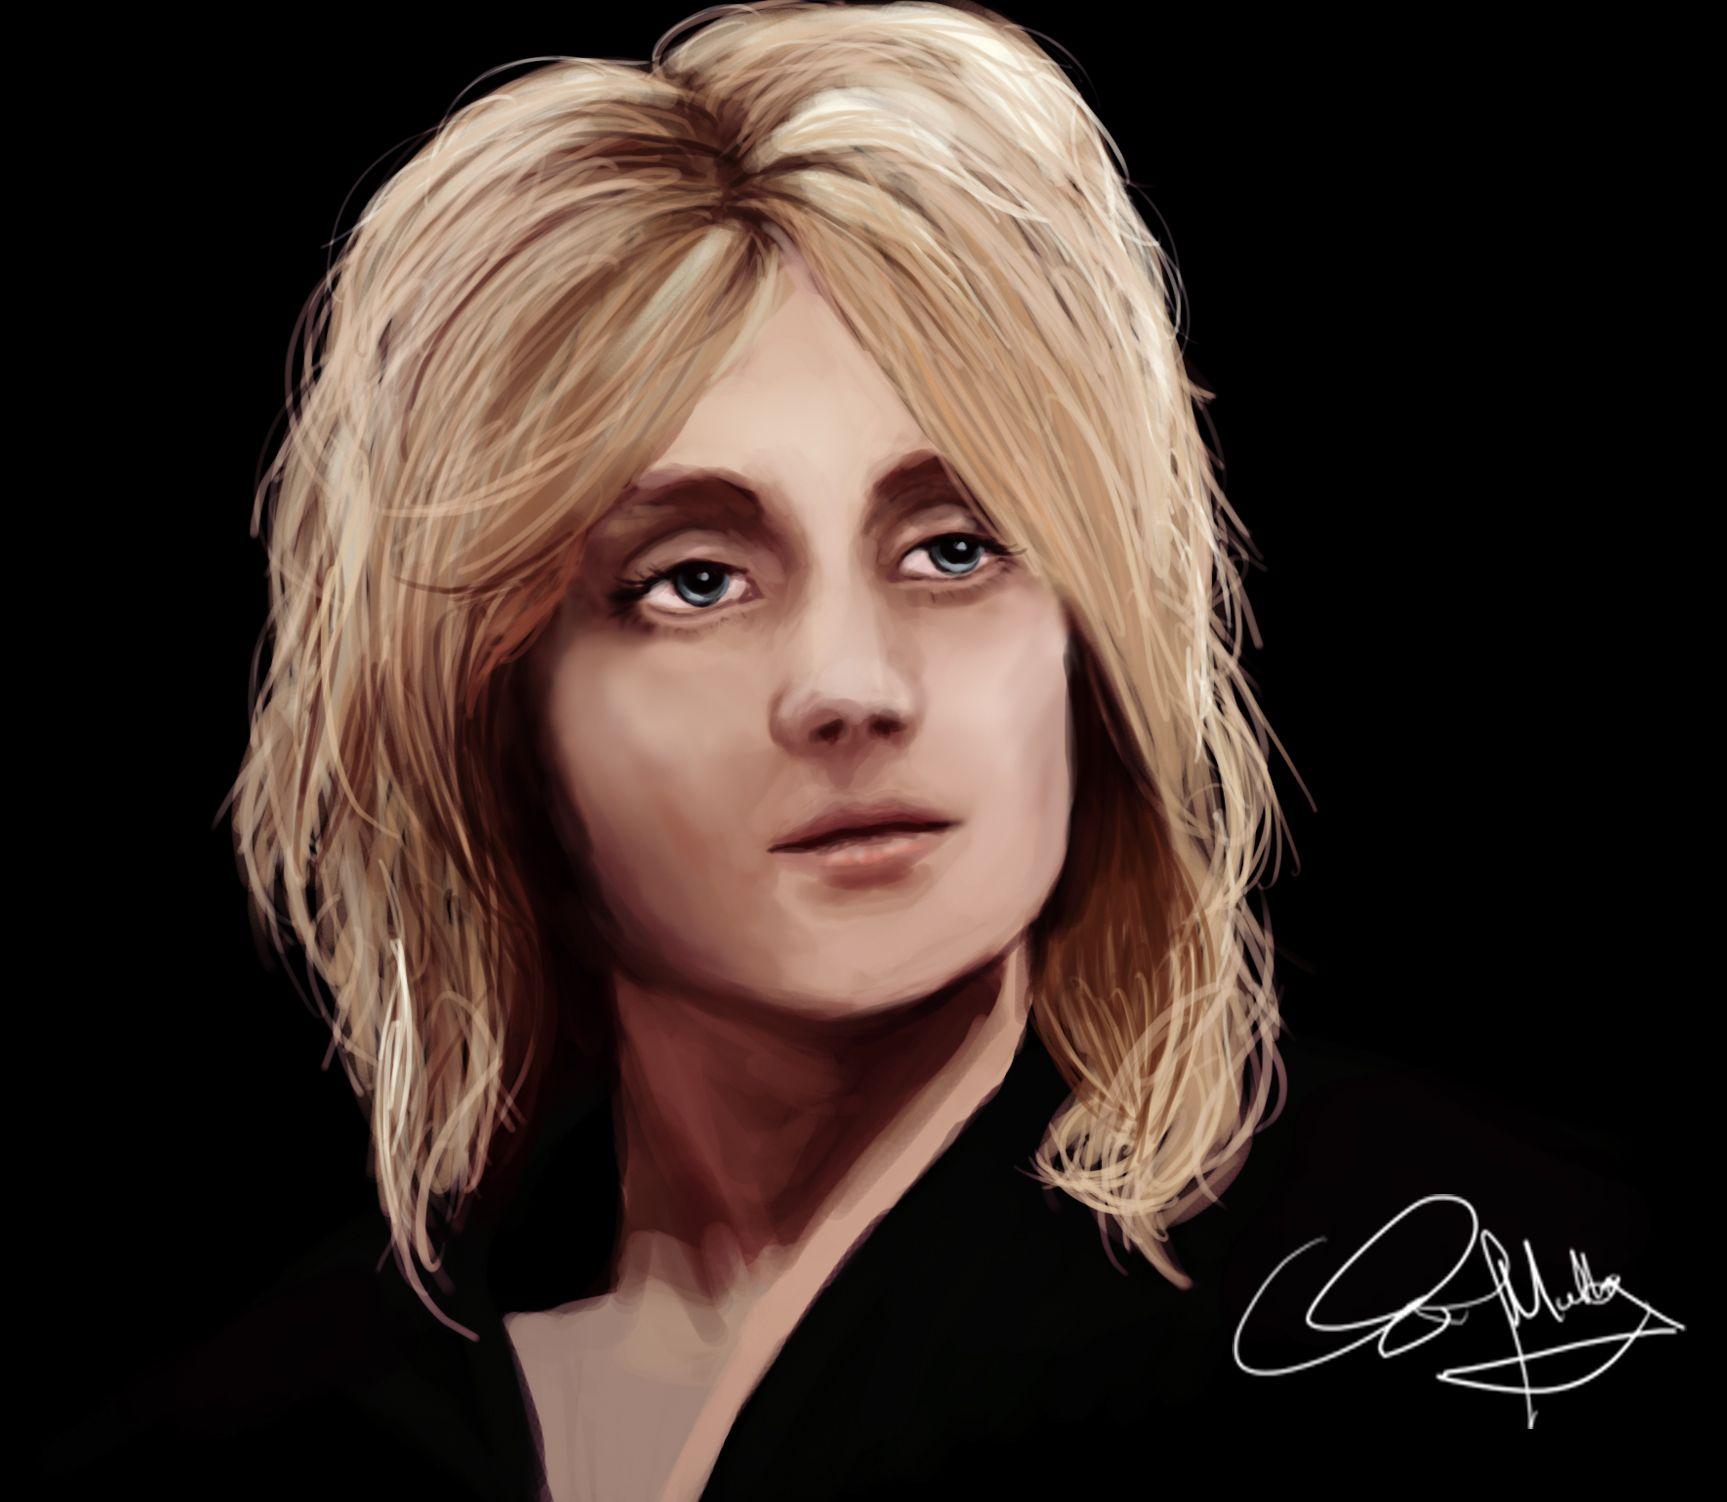 Roger Taylor image Roger HD wallpaper and background photo